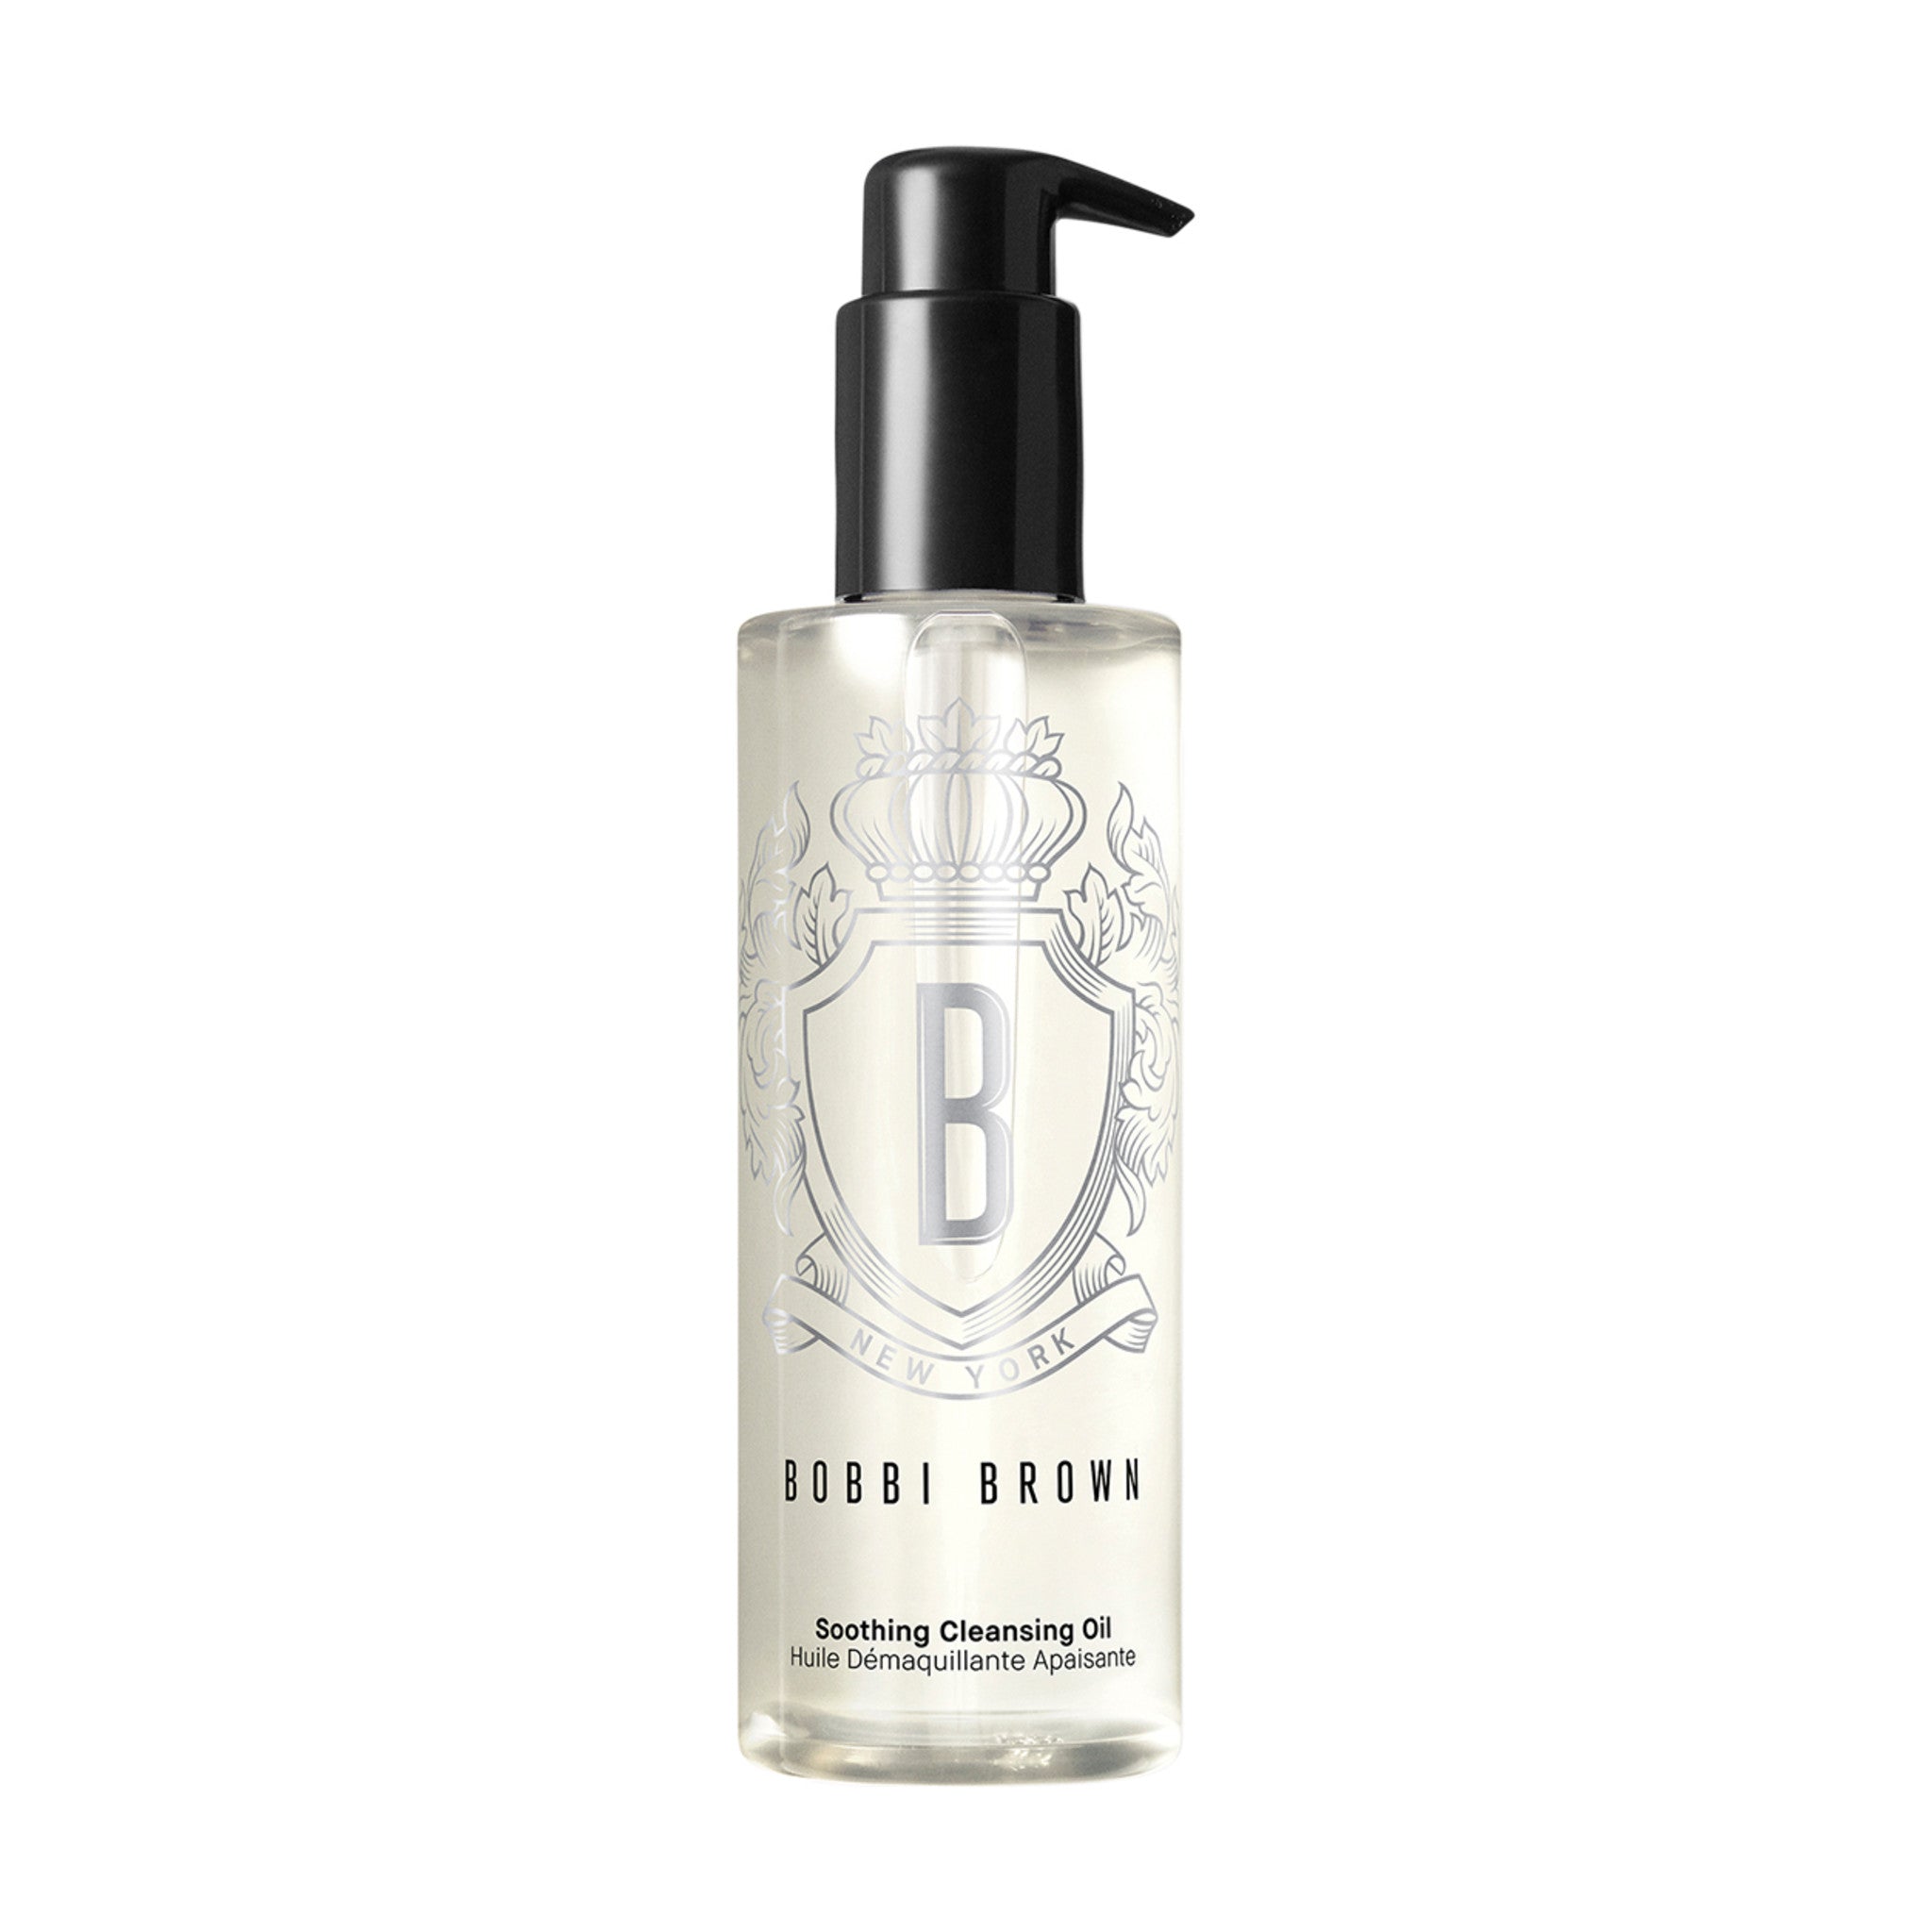 Bobbi Brown Soothing Cleansing Oil Size variant: 6.76 oz main image.